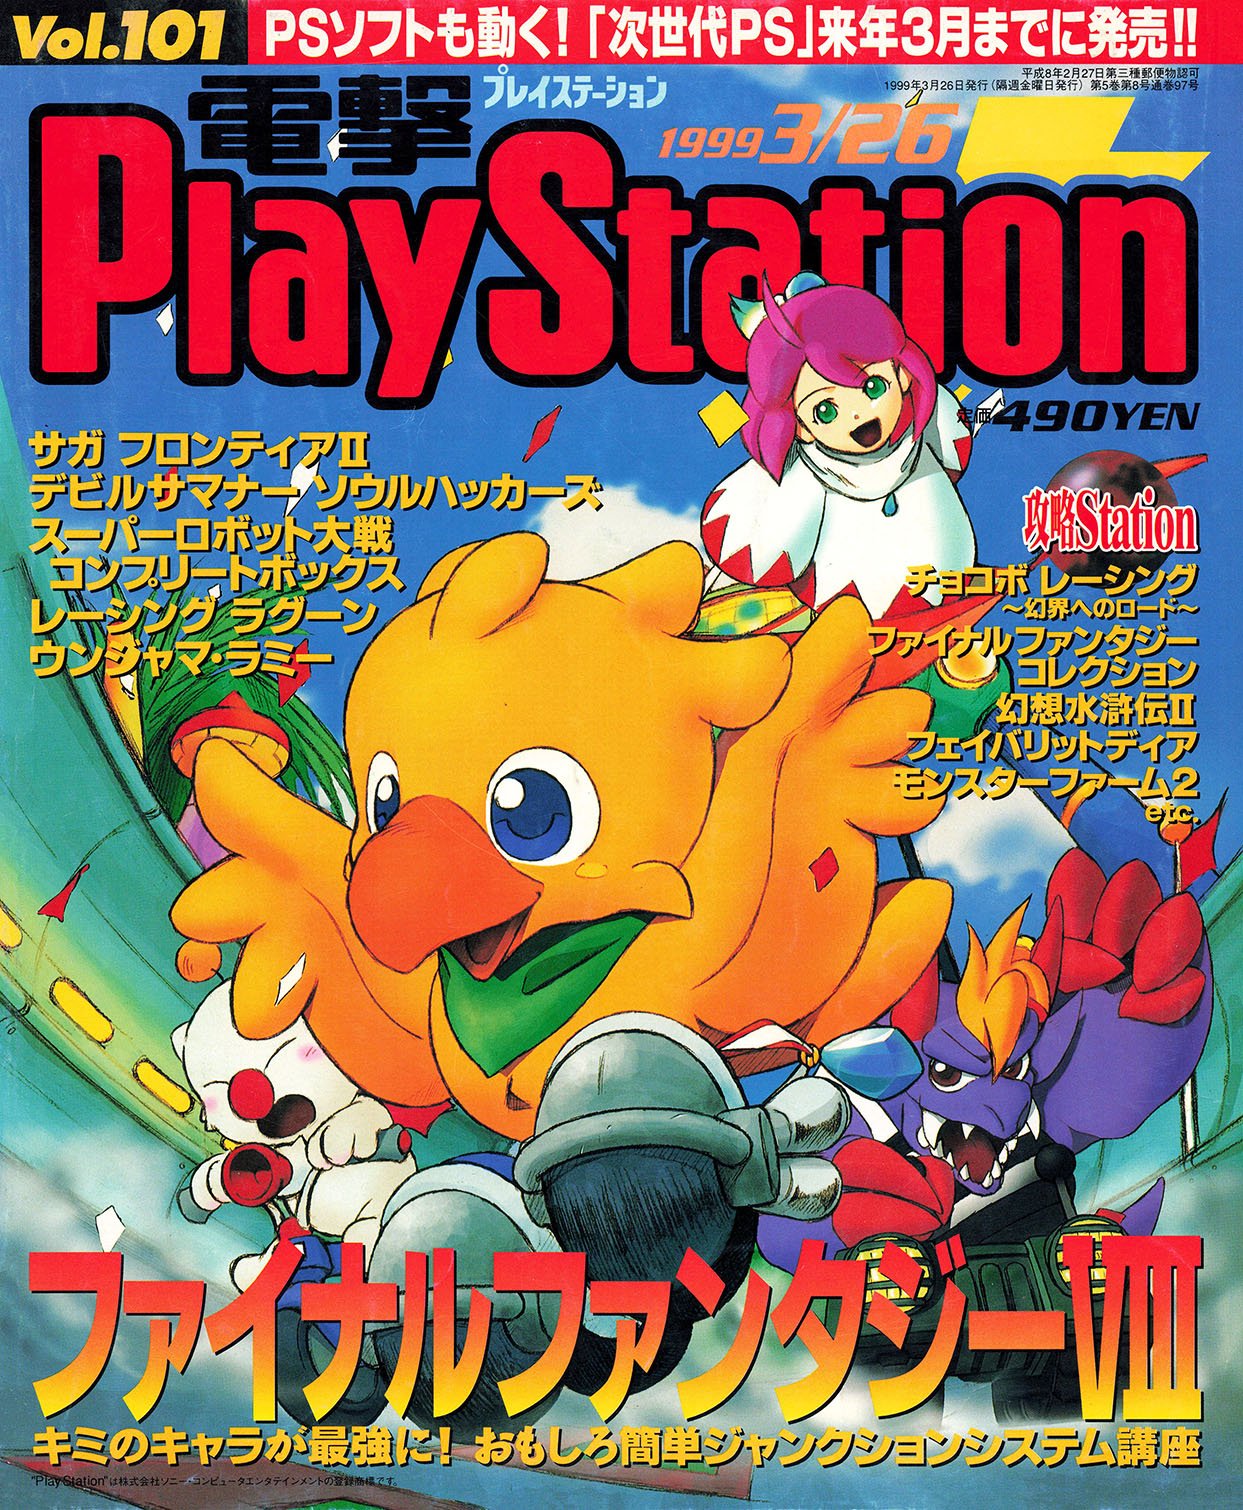 More information about "Dengeki PlayStation Vol.101 (March 26, 1999)"